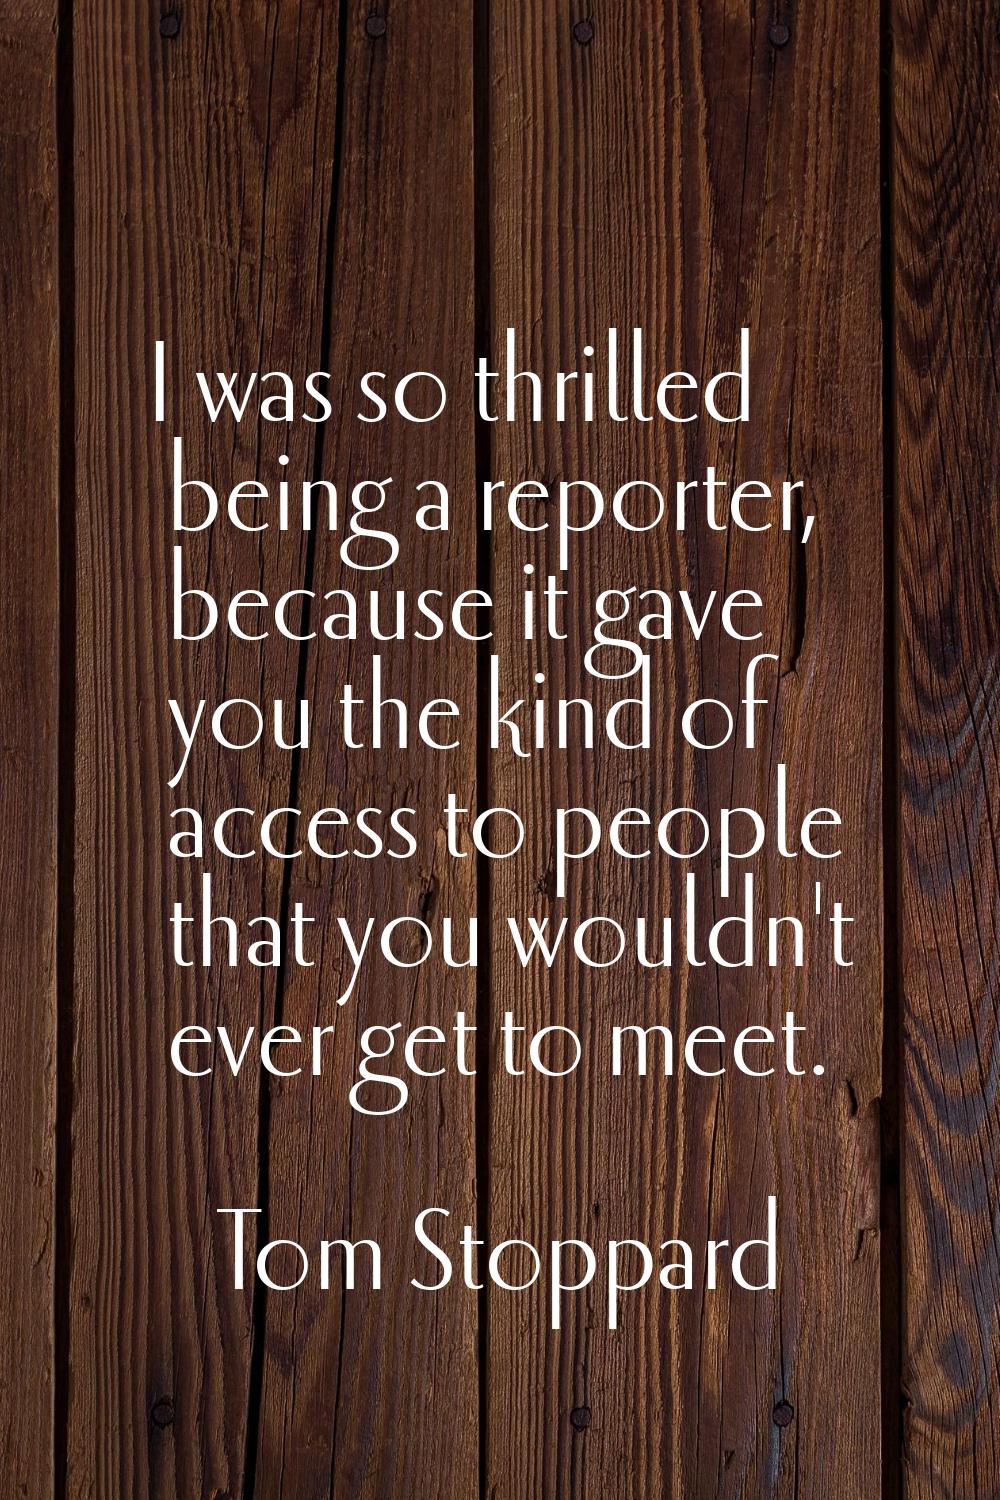 I was so thrilled being a reporter, because it gave you the kind of access to people that you would